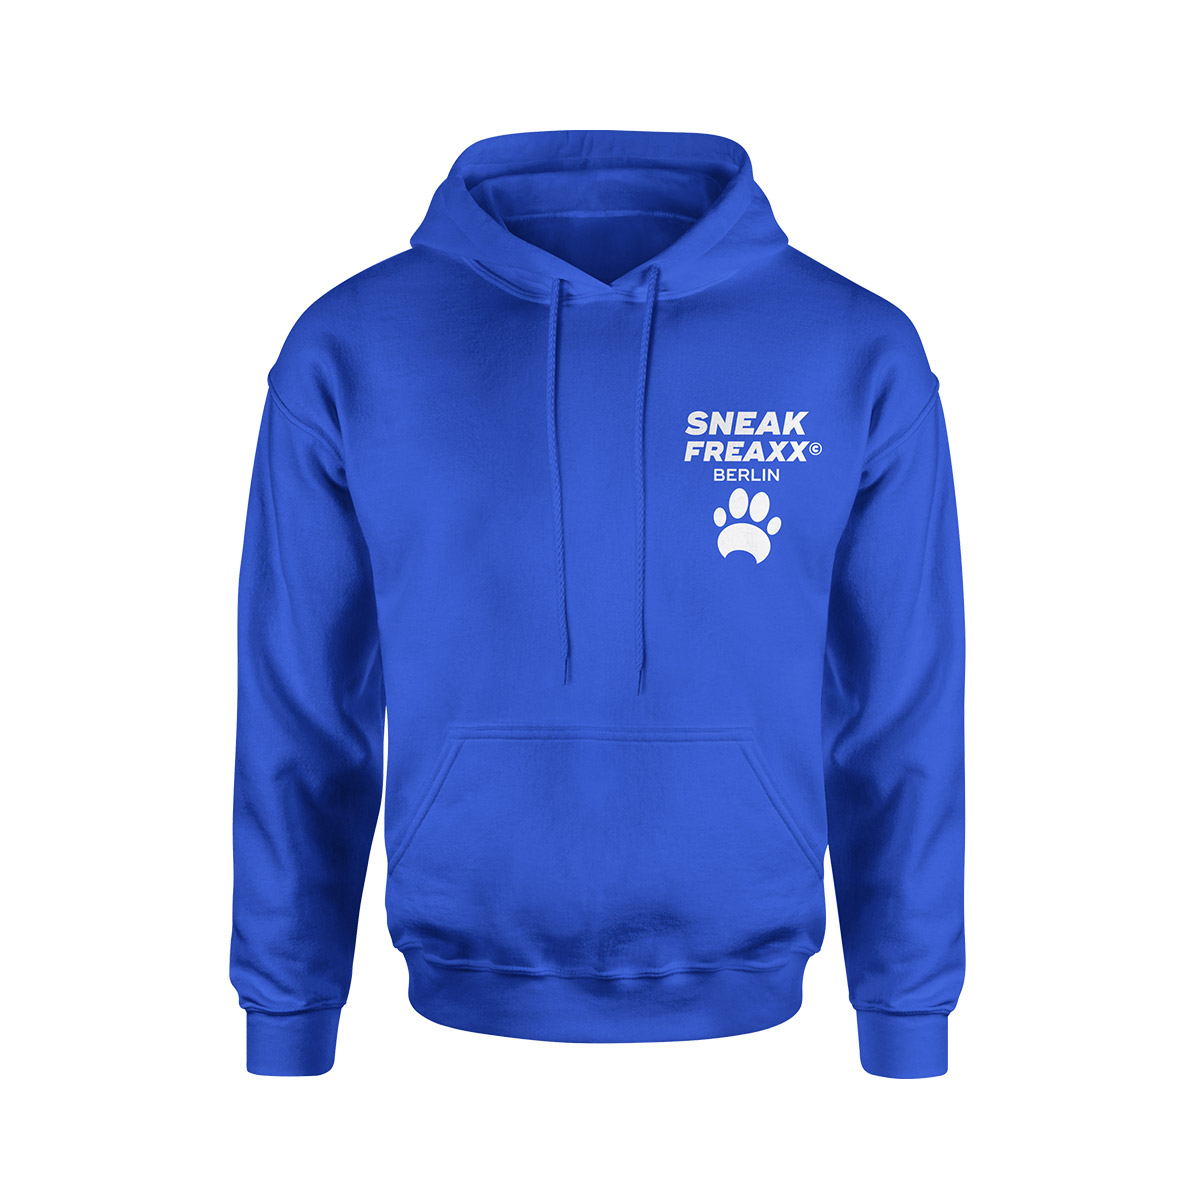 HOODIE - PUPPY WOOF - COLOUR